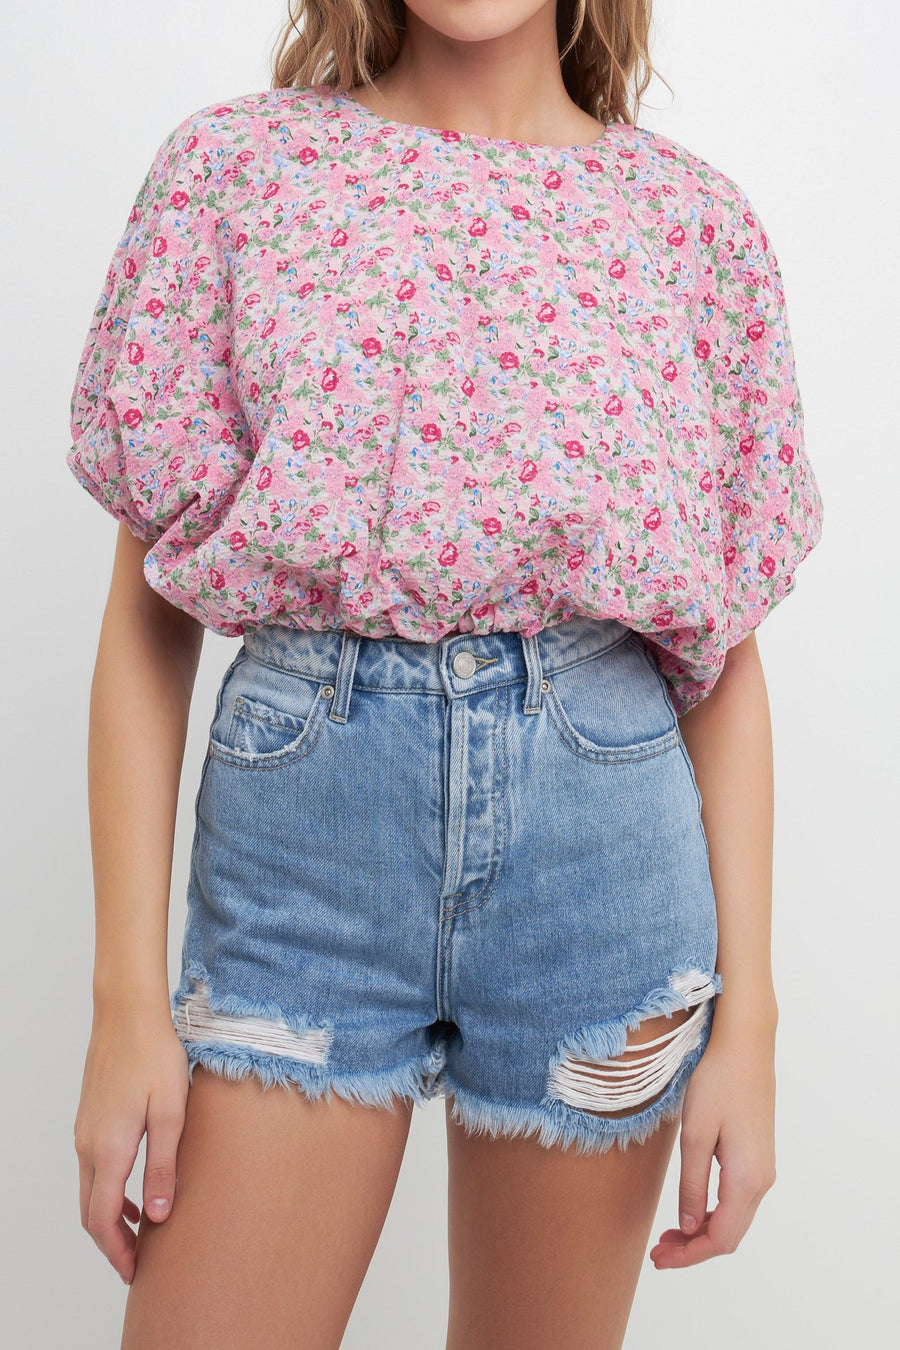 FREE THE ROSES-Voluminous Crop Top-TOPS available at Objectrare